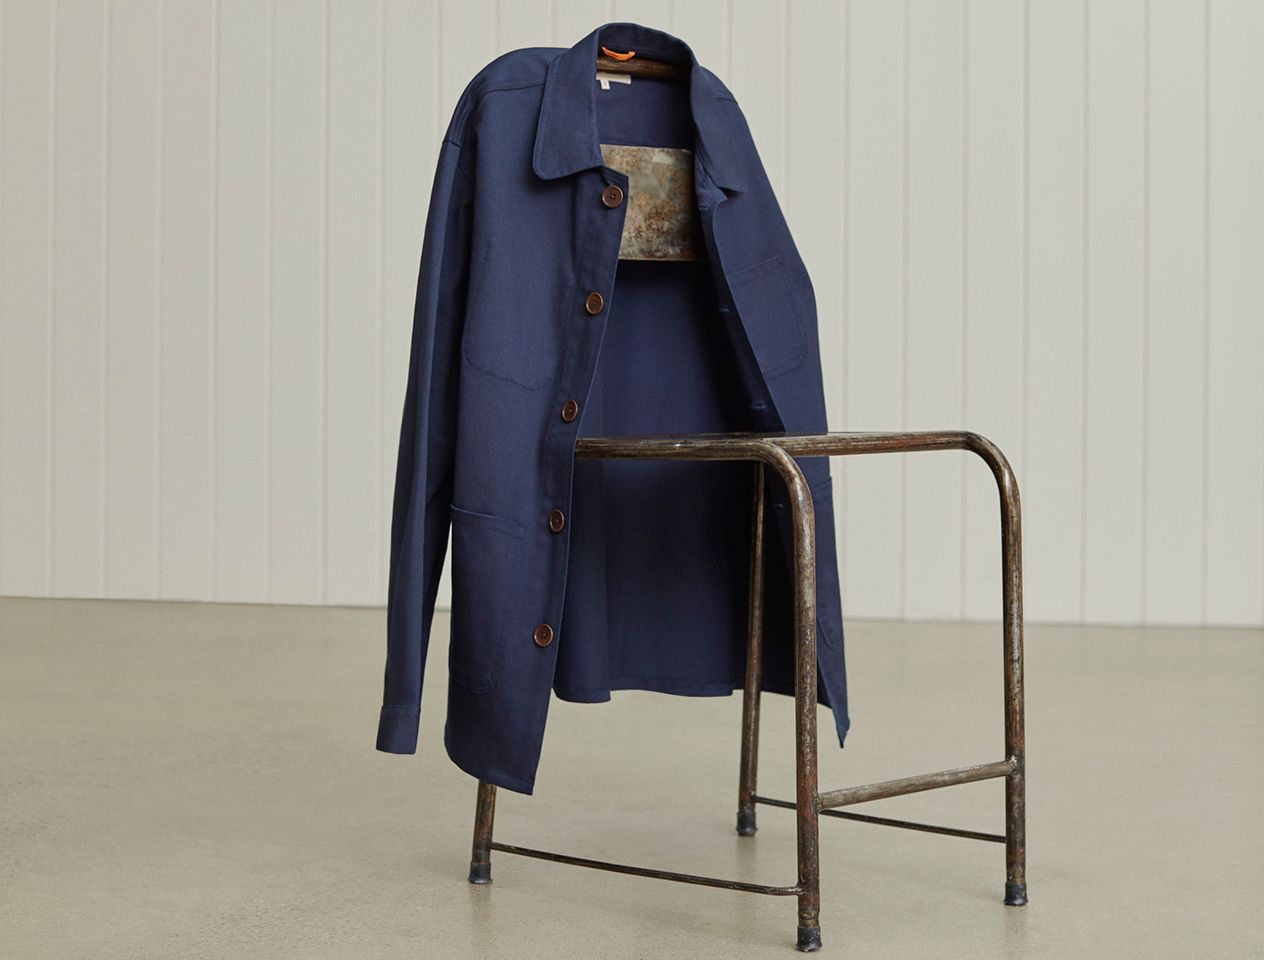 The history of the French workwear jacket